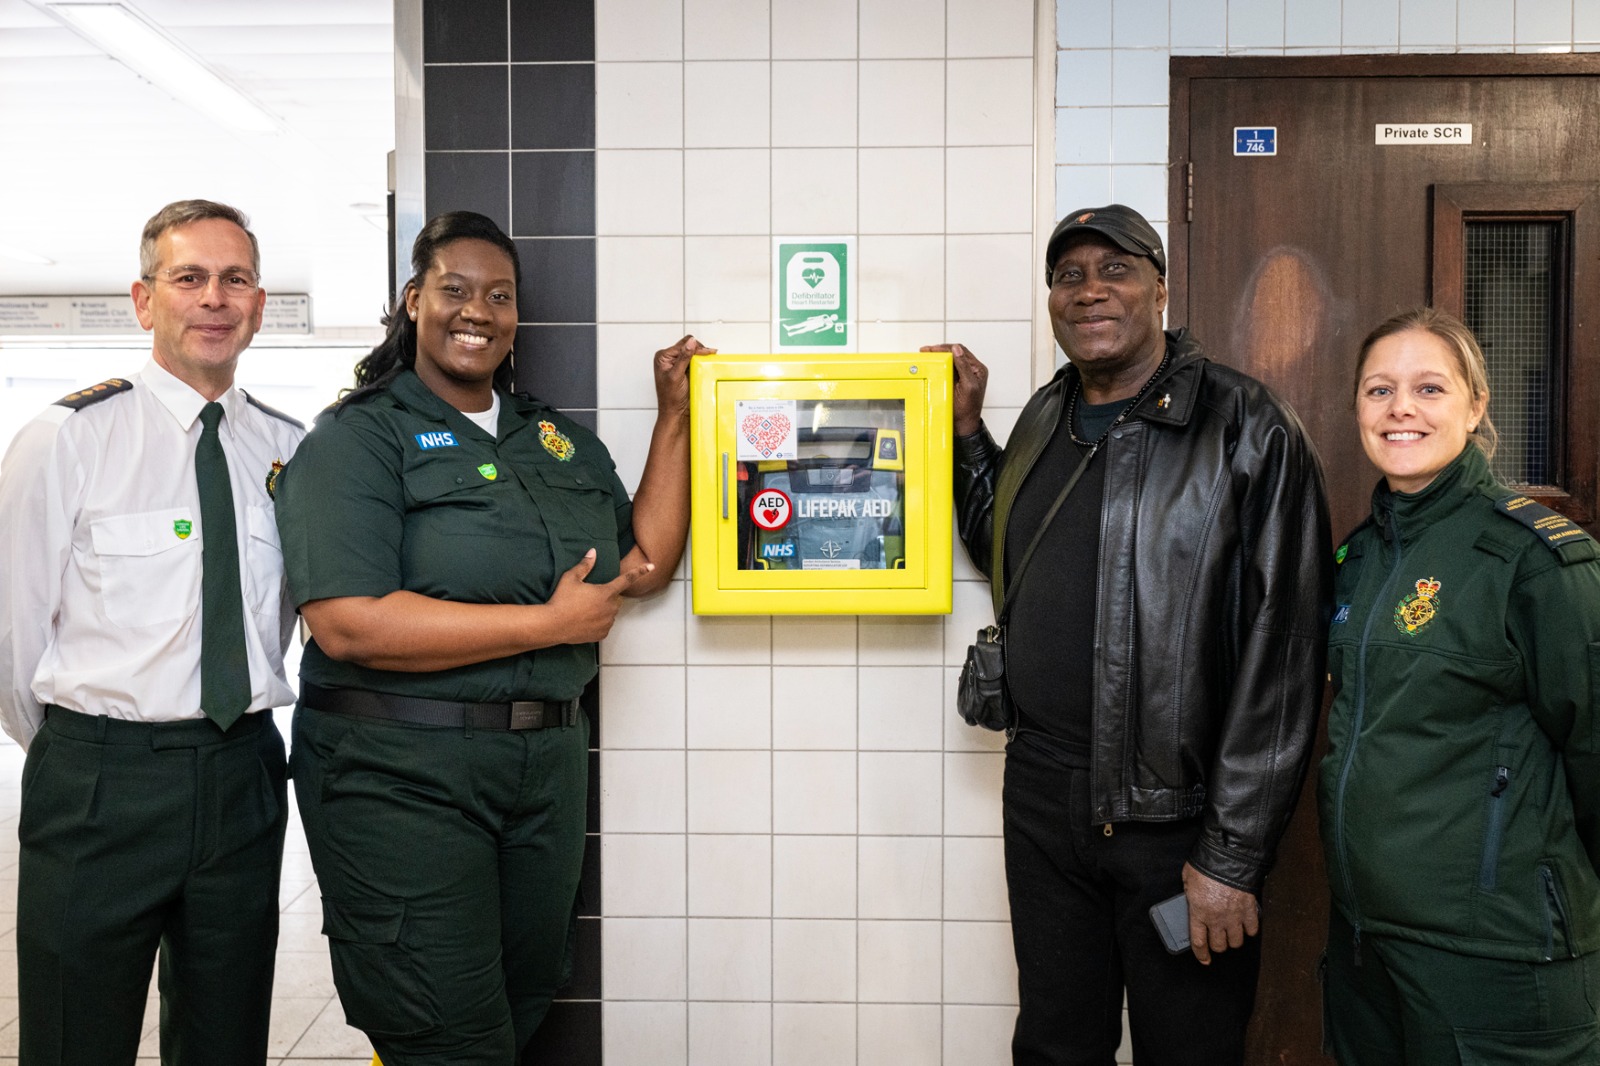 Group photo of London Ambulance colleagues standing by a newly installed defibrillator at a London underground station. 